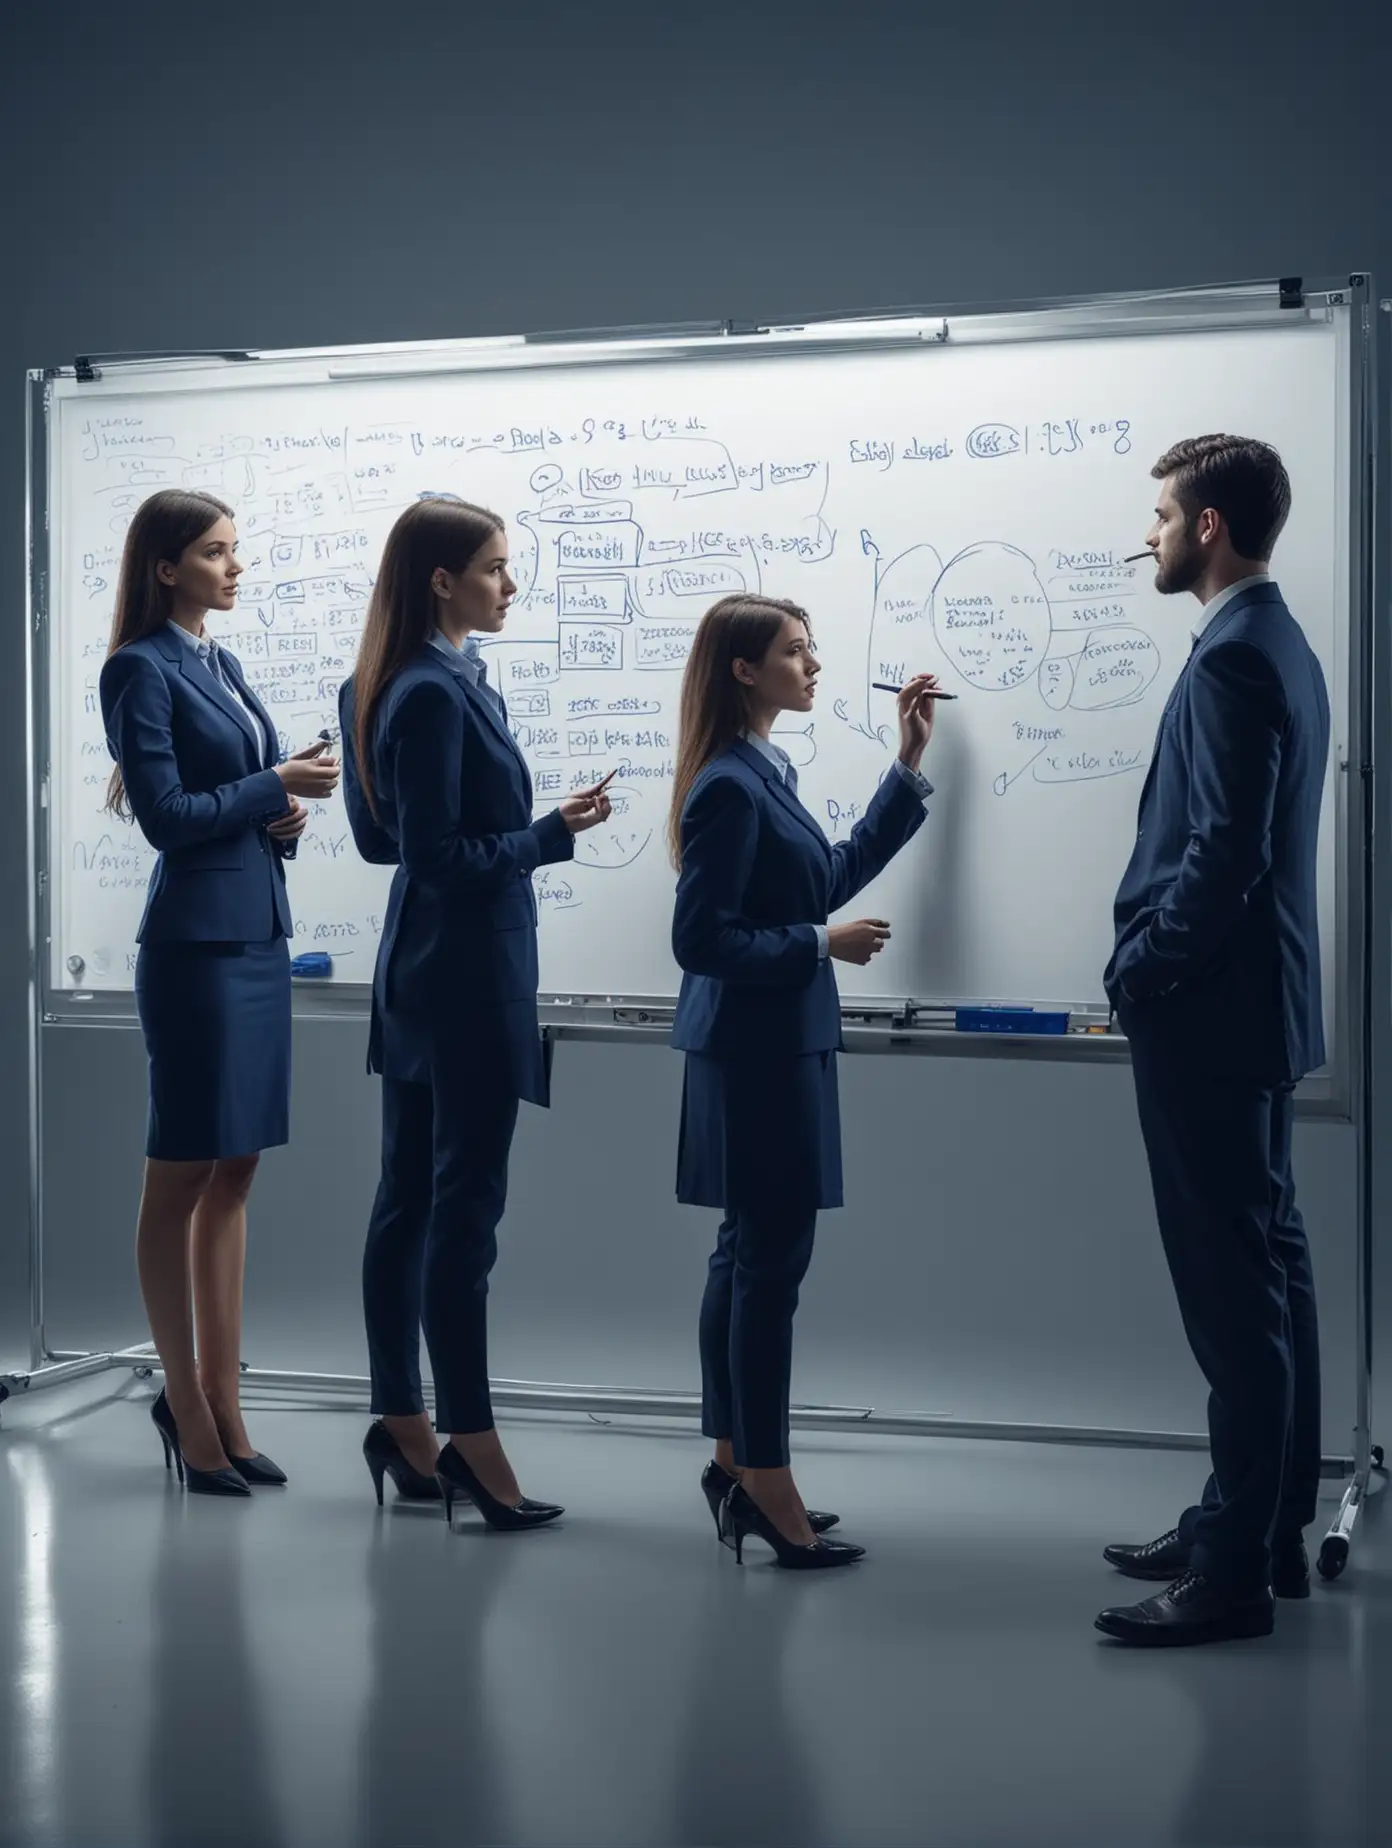 show professional photo with slight reflection. dark blue theme. 6 persons male and female having talking with each other while drawing at whiteboard.